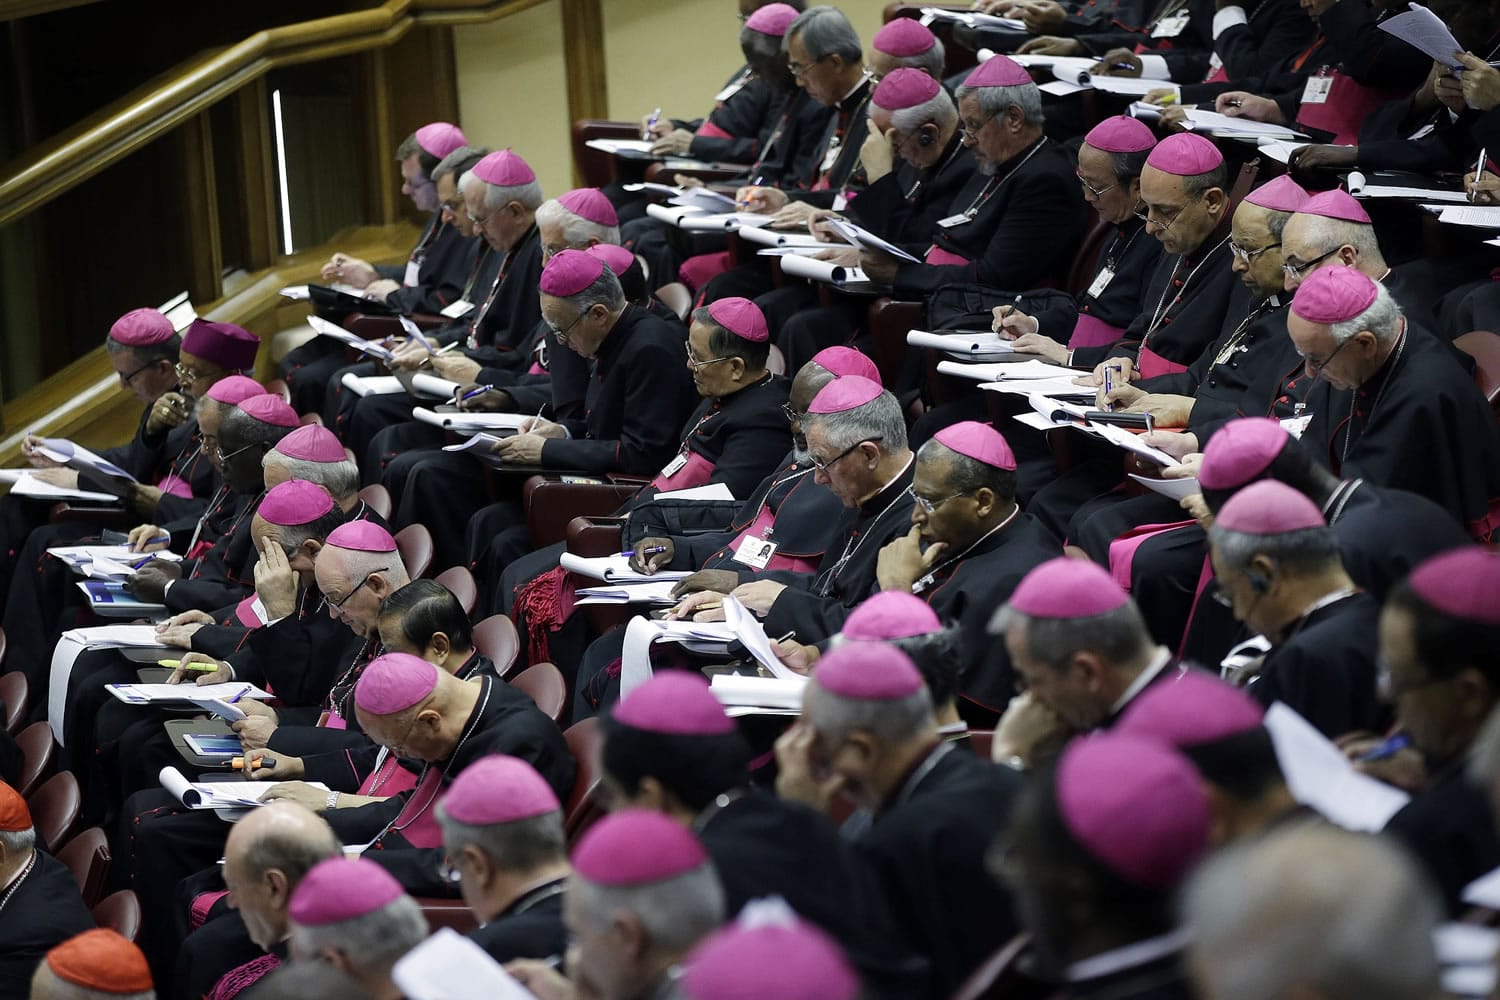 Bishops attend a morning session of a two-week synod on family issues at the Vatican on Monday.